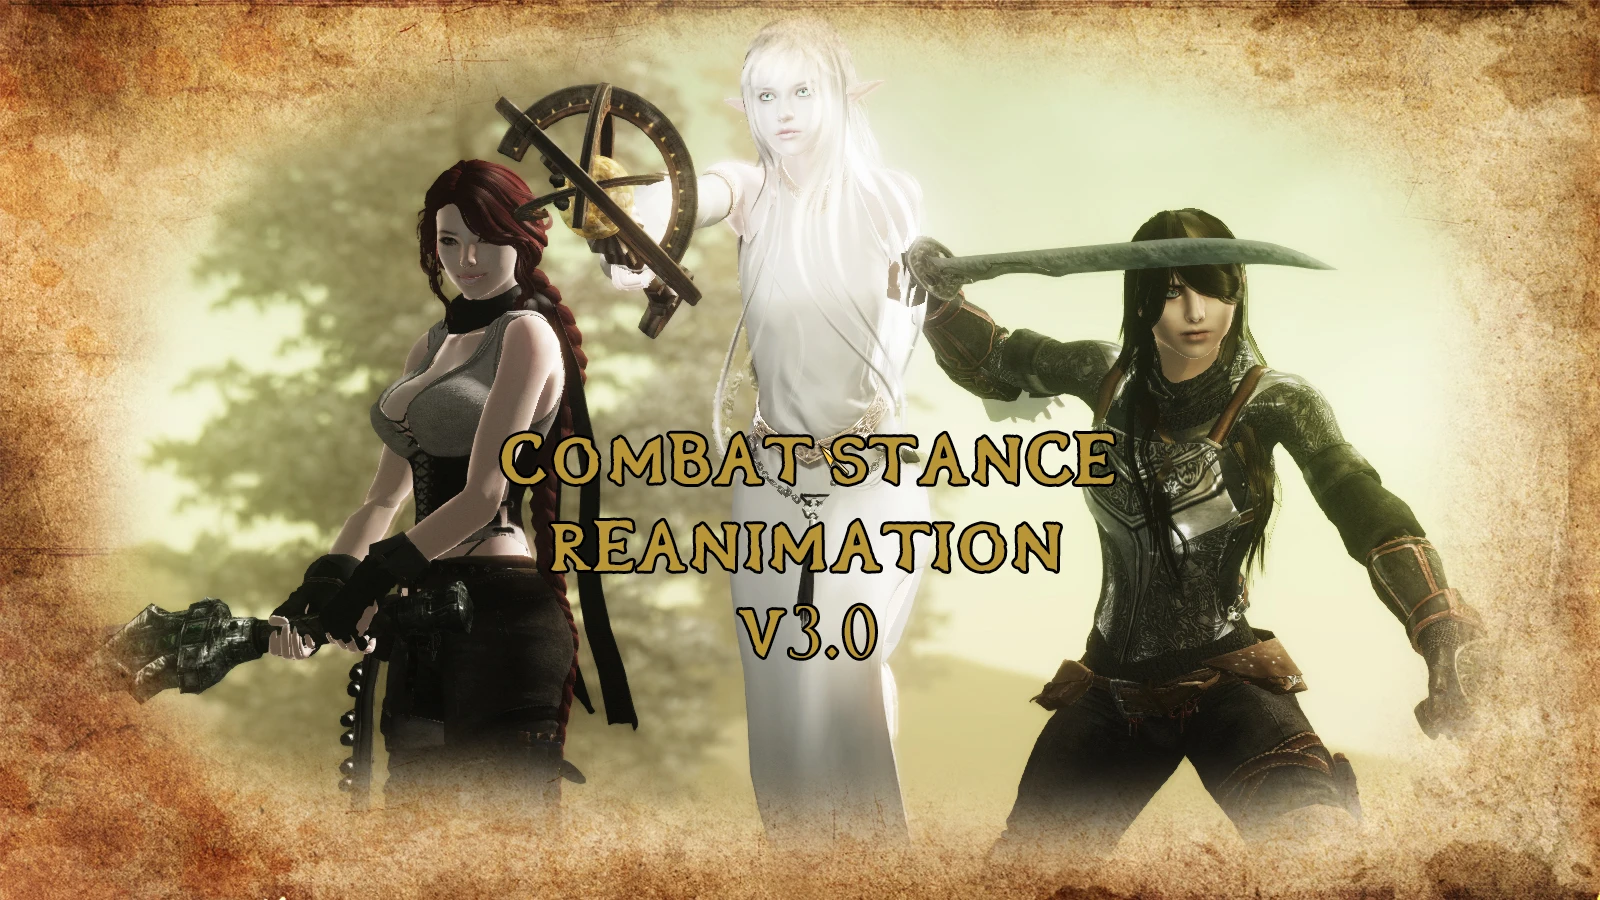 More information about "Combat Stance Reanimation"